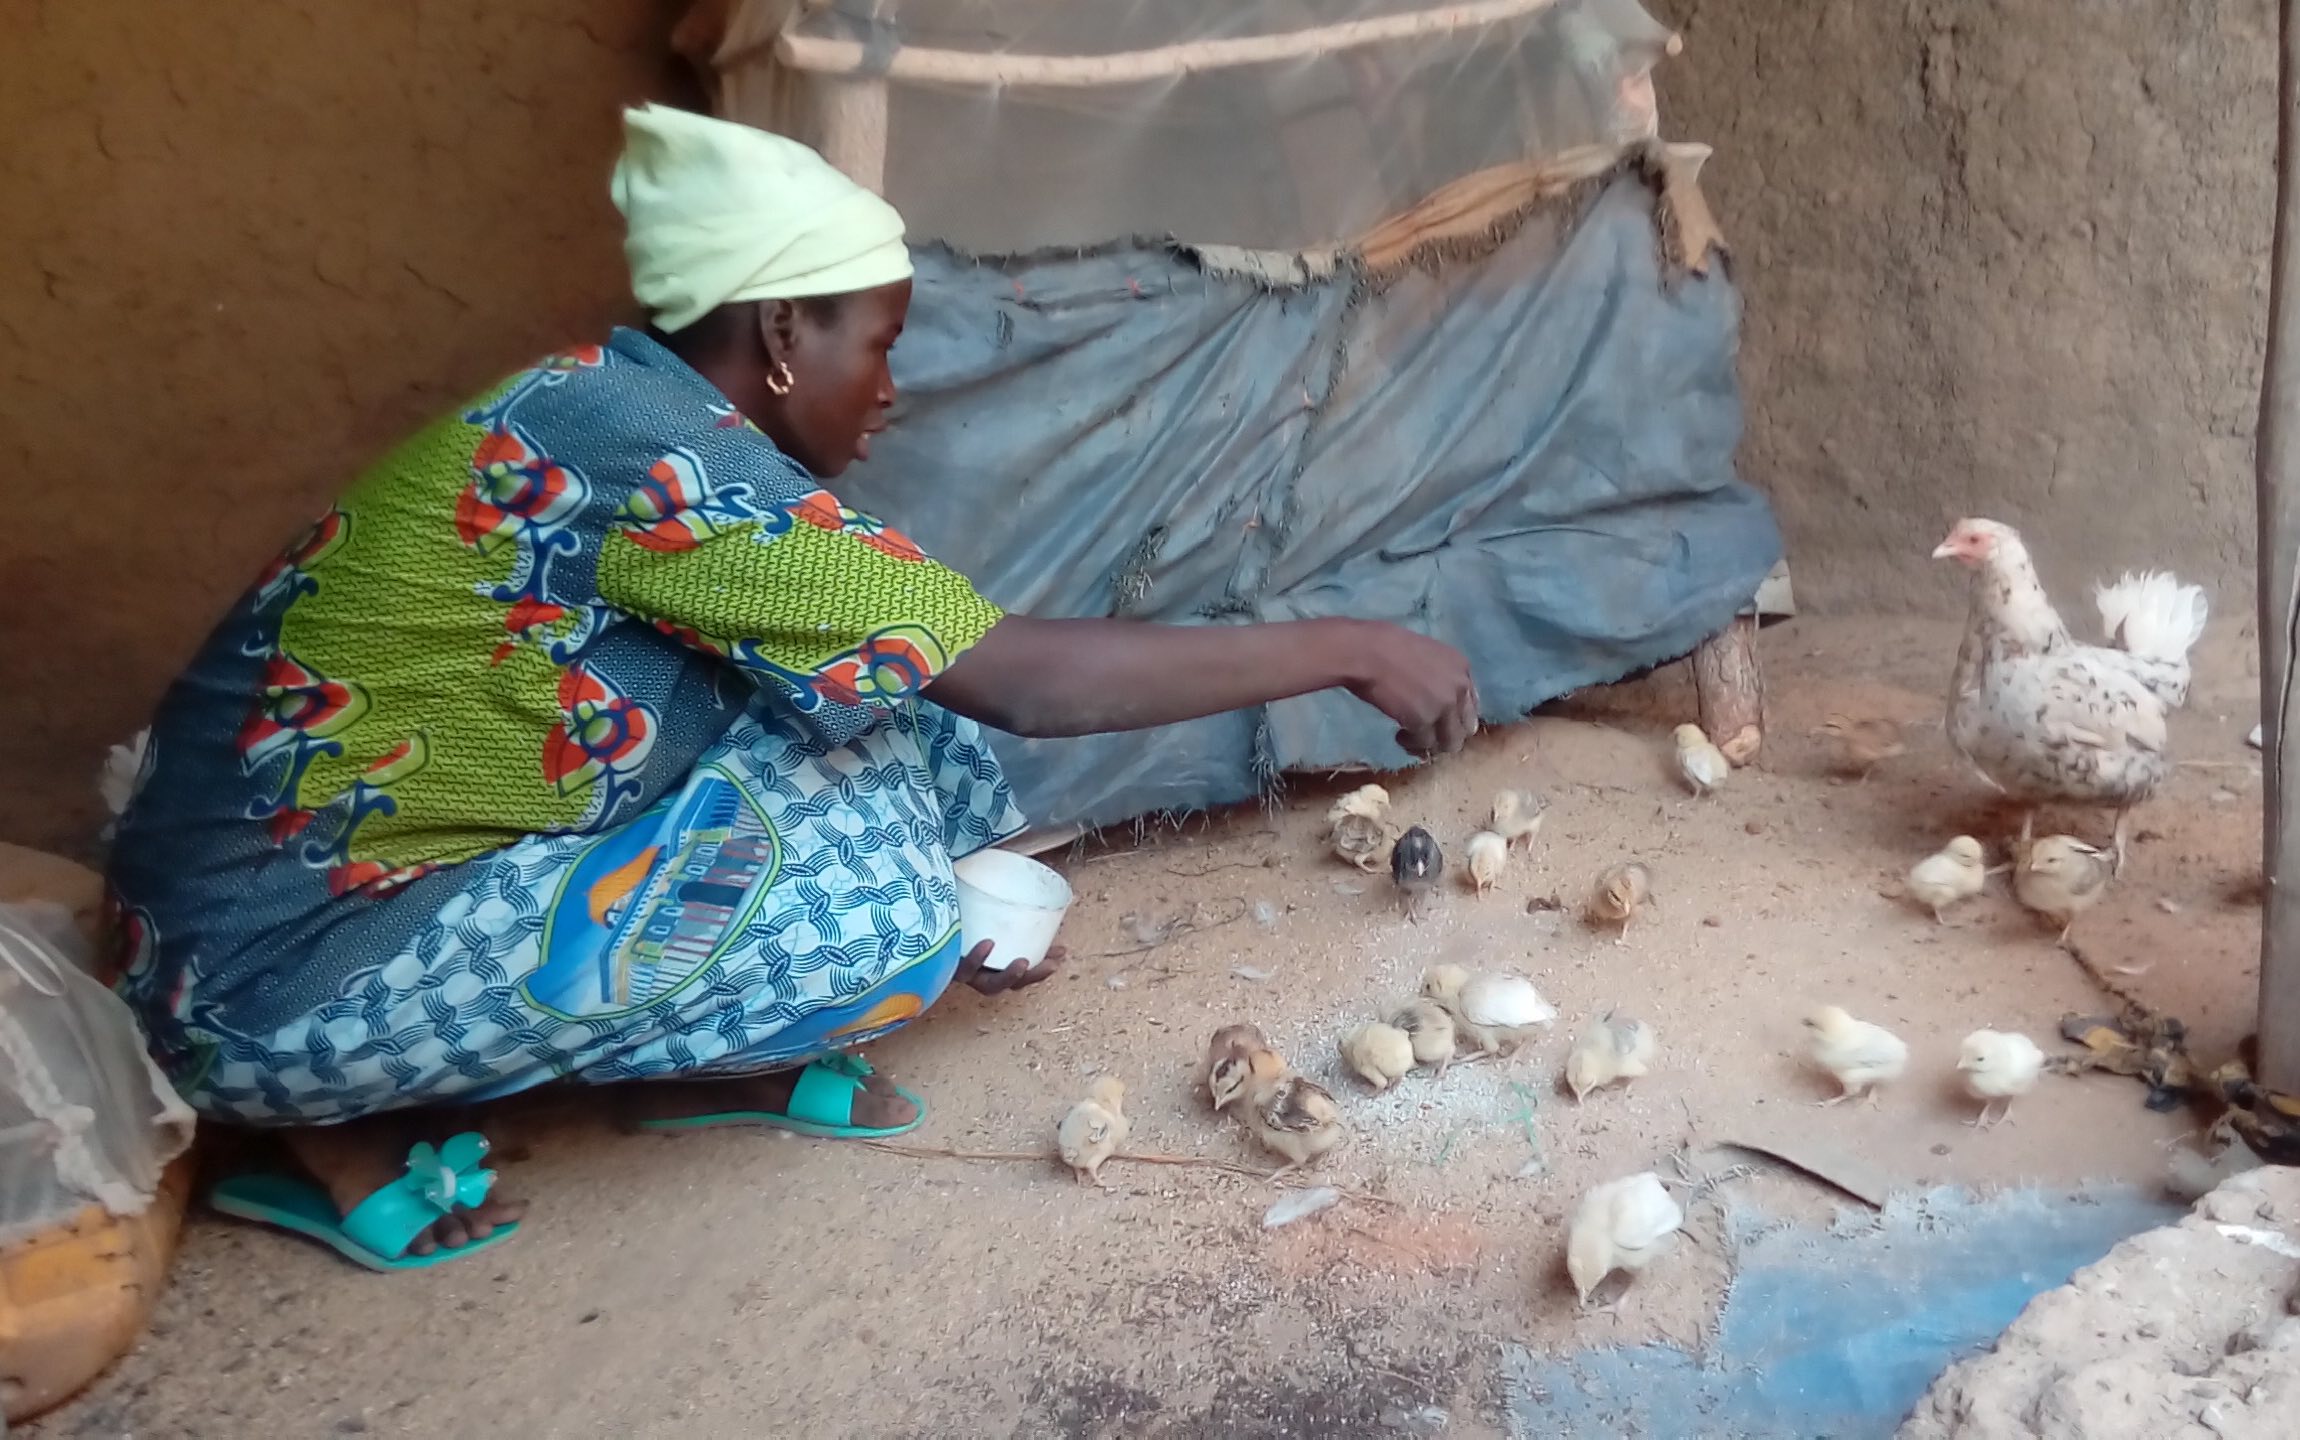 Unpacking the effects of a complex intervention on women’s poultry production: Evidence from Burkina Faso